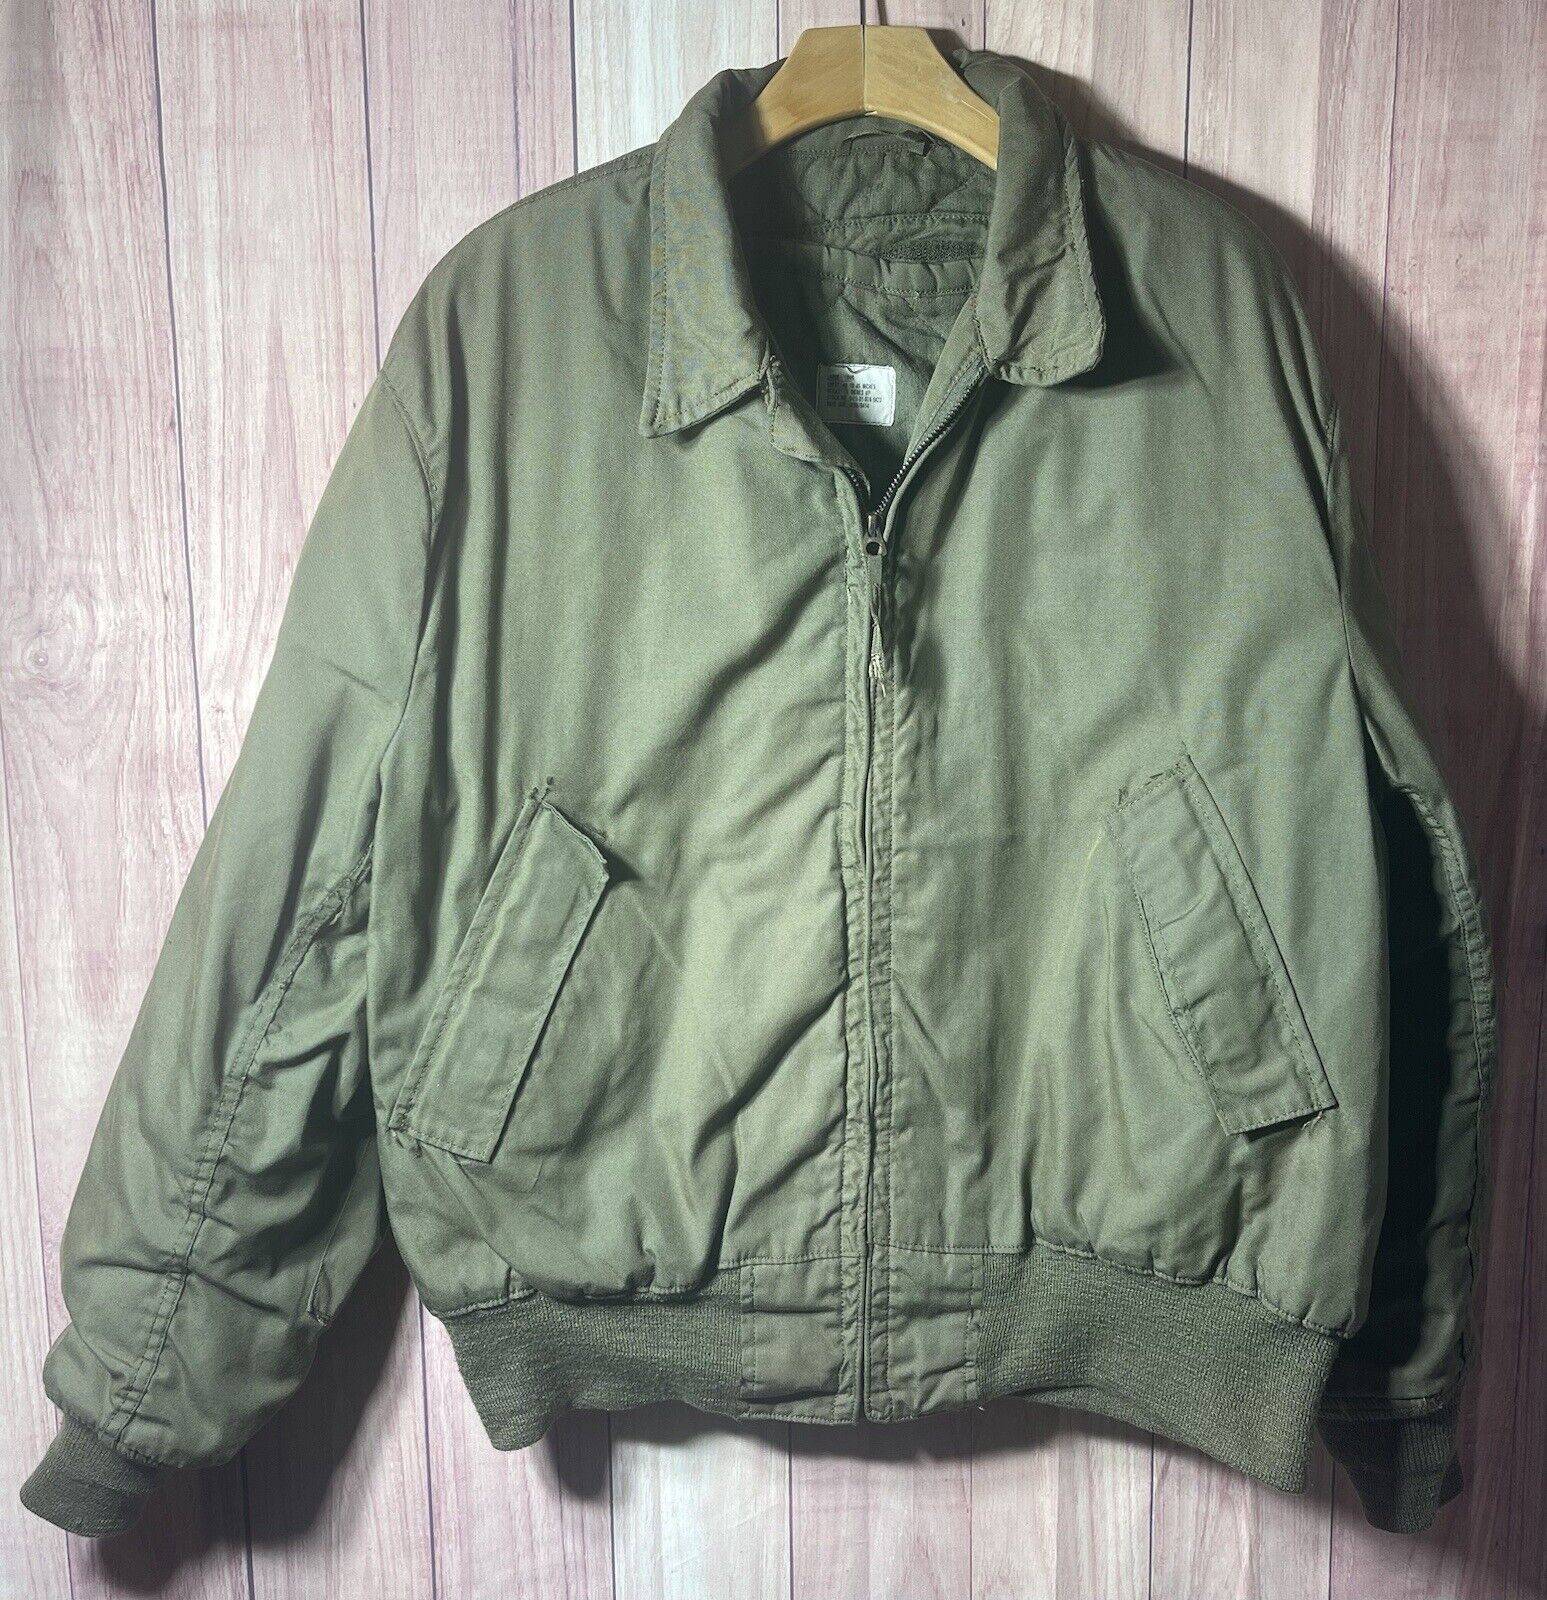 Vintage 1980s US Military Cold Weather High Temperature Resistant Jacket Large 